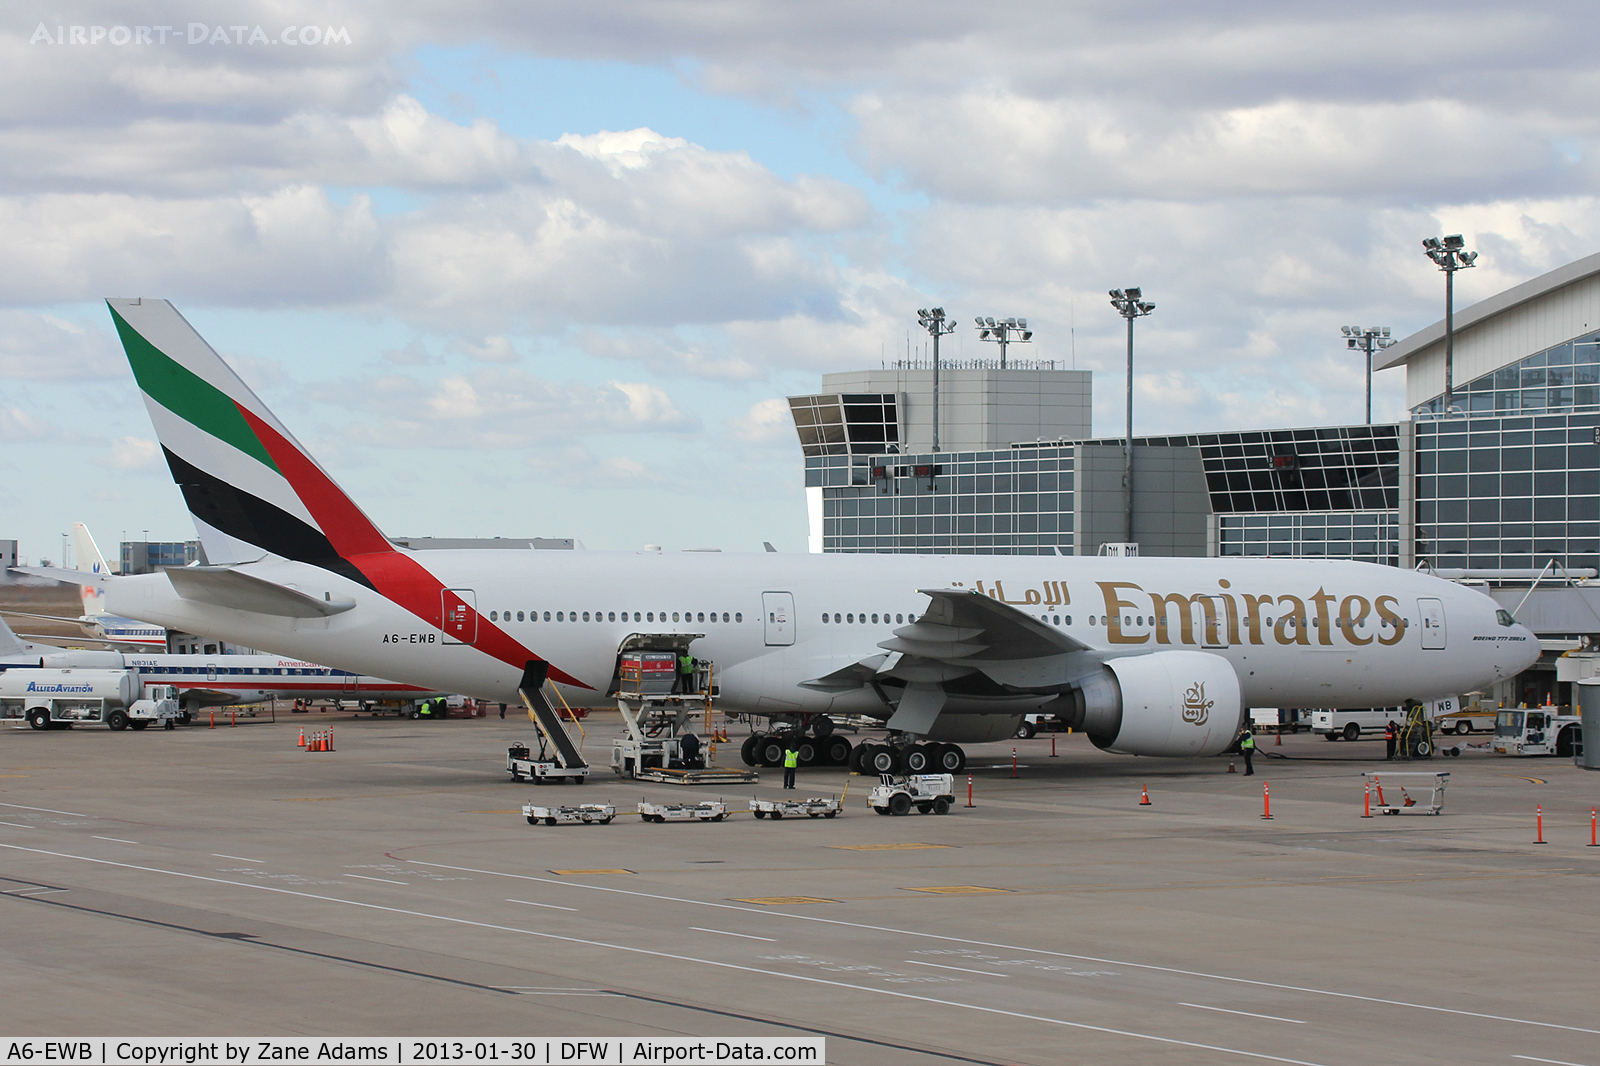 A6-EWB, 2007 Boeing 777-21H/LR C/N 35573, Emirates 777 at the gate - DFW Airport